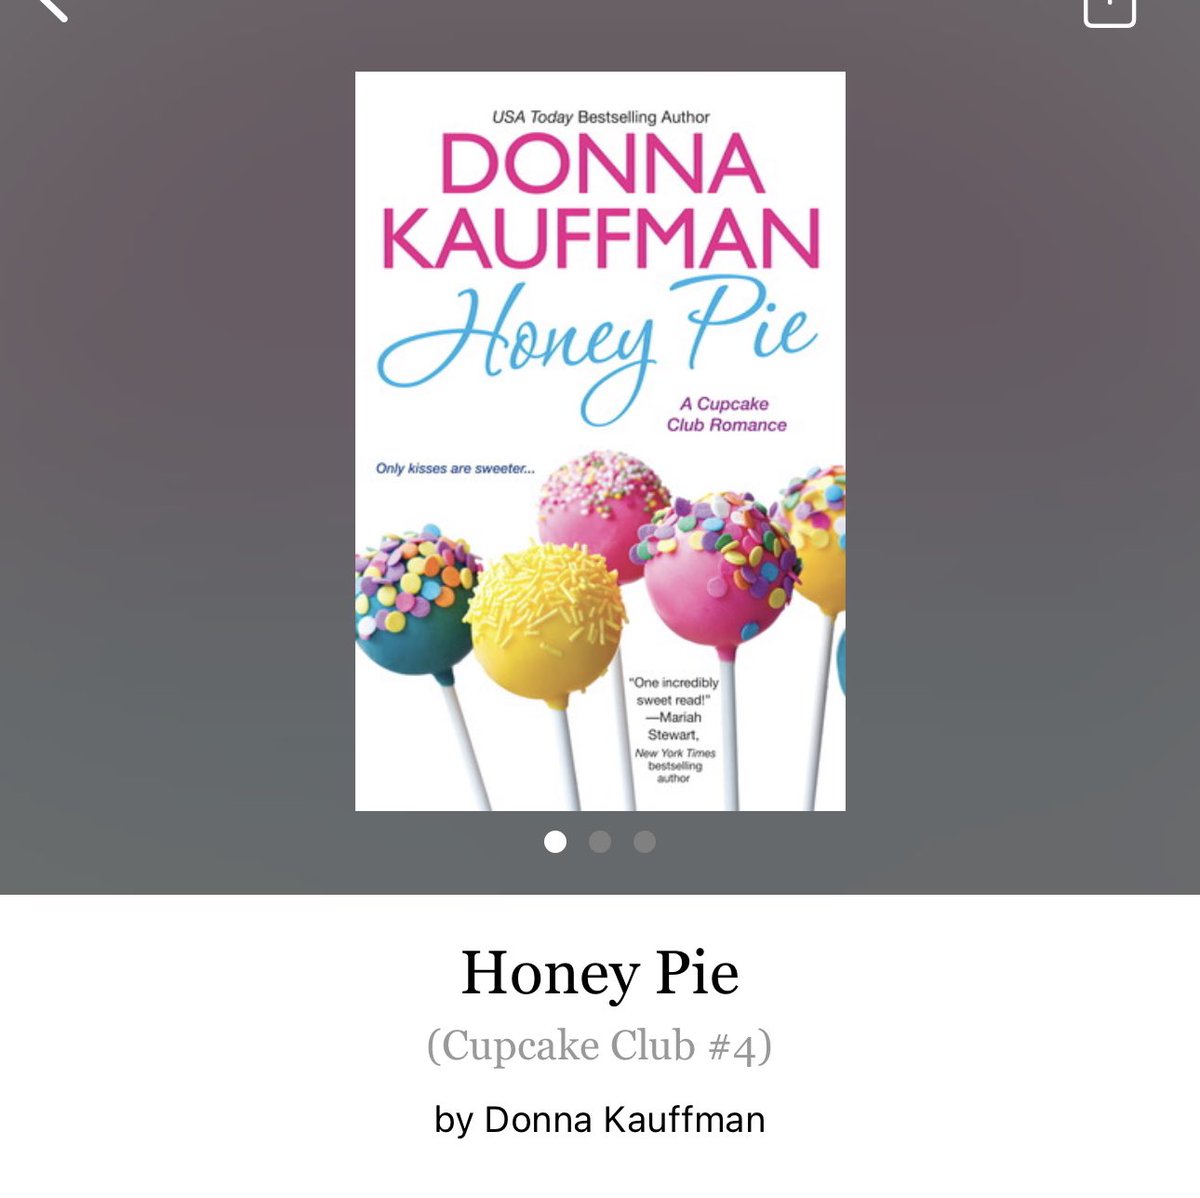 Honey Pie By Donna Kauffman 

#HoneyPie by #DonnaKauffman #4832 #20chapters #309pages #375of400 #Series #Kindle #81for21 #CupckaeClub #Book4of4 #HoneyAndDylan #sugarberryIsland #clearingoffreadingshelves #whatsNext #readitquick